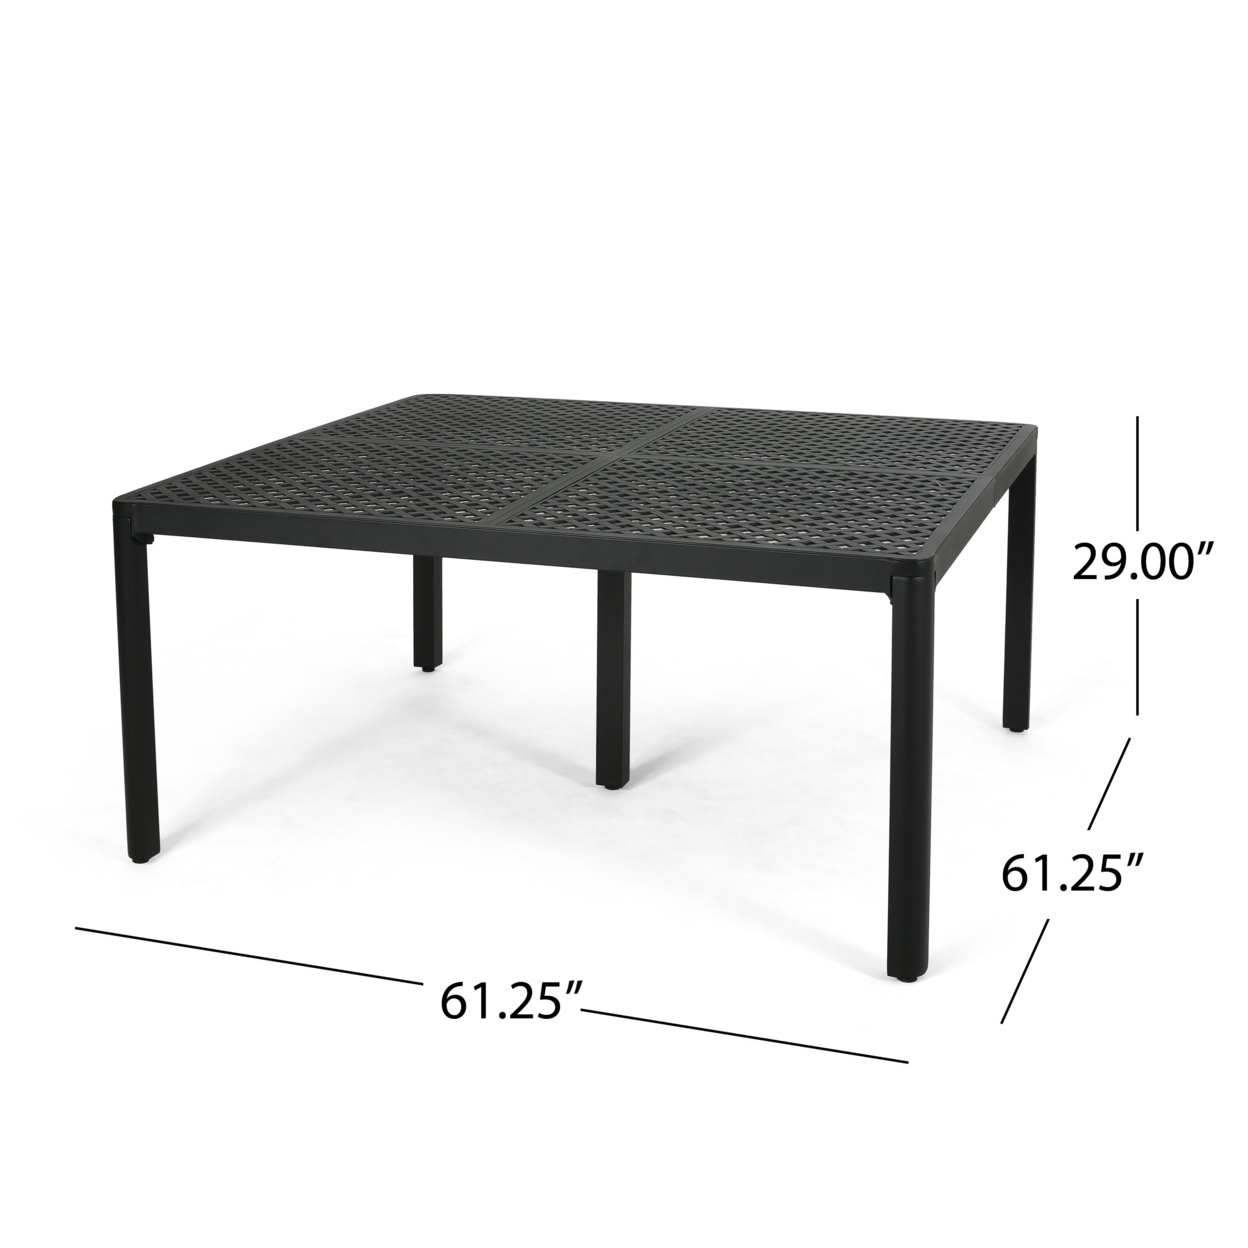 Athena Modern Aluminum Dining Table With Woven Accents - Gloss Black